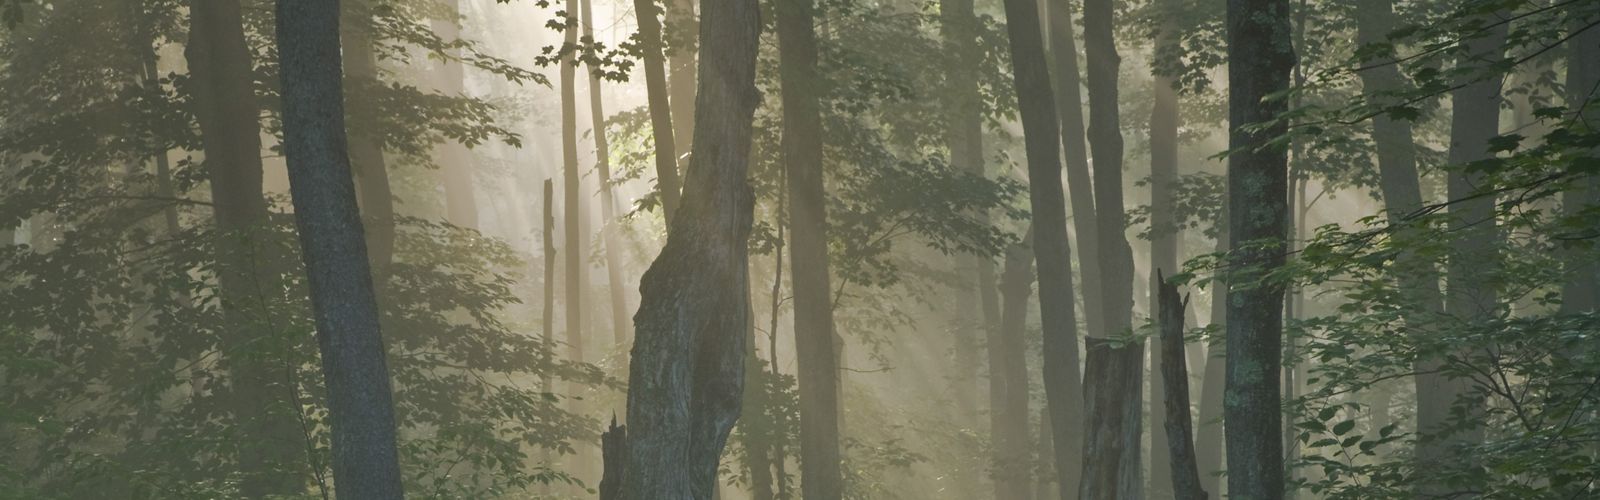 Sun shines peaks through a forest lined with tall thin trees and dense fog.